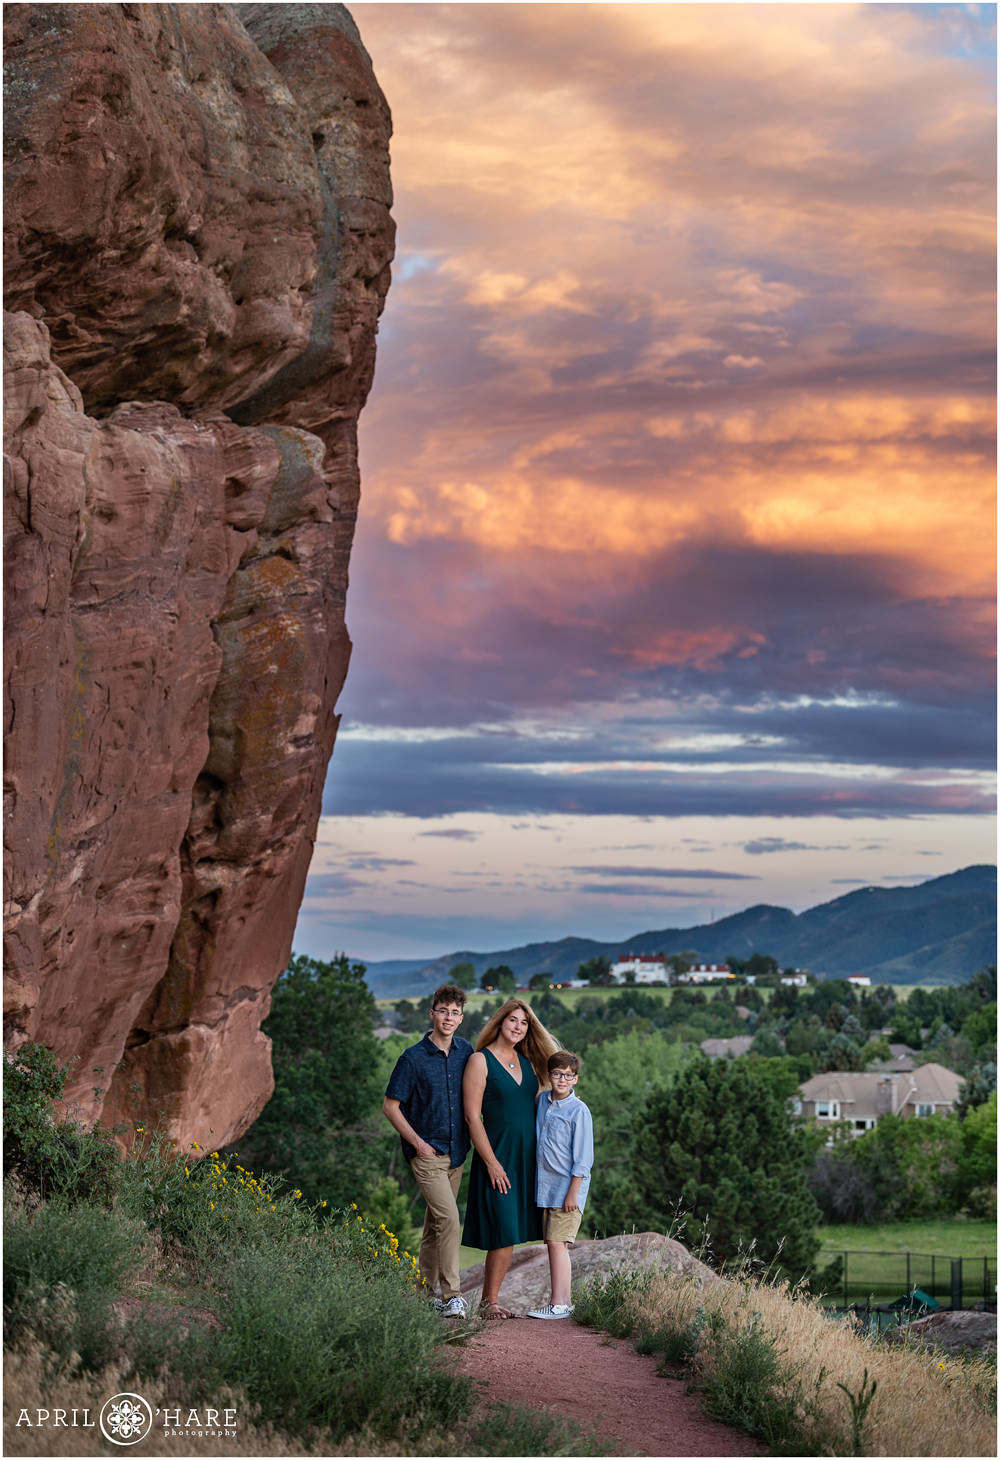 Ken Caryl Family Photos with a beautiful red rocks backdrop and pretty sunset sky and Manor House in the background